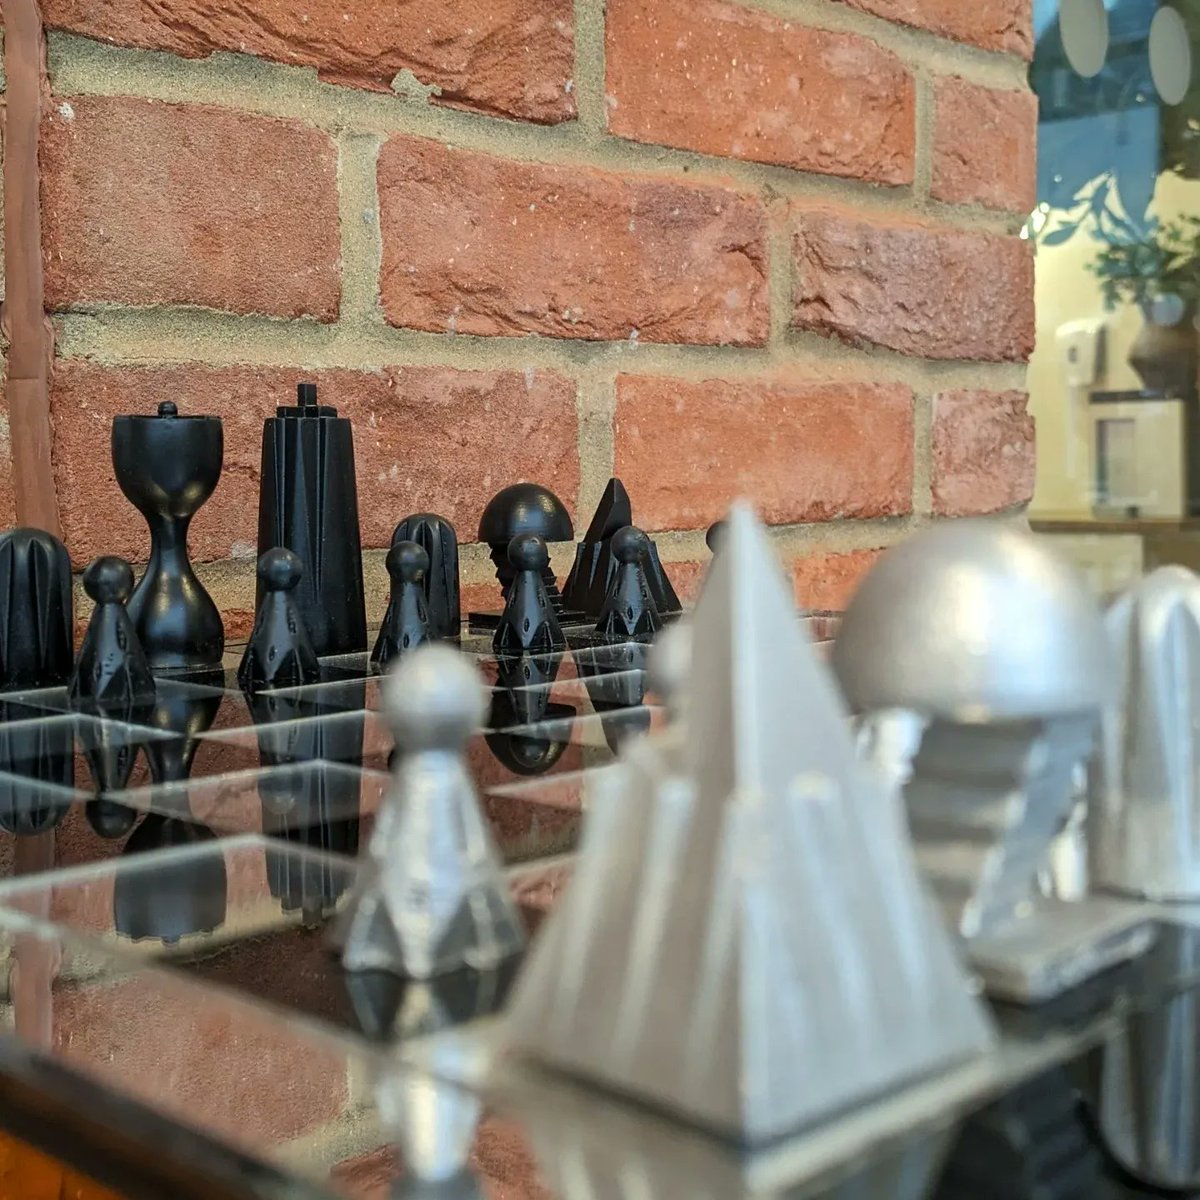 Come and see our chess set projects by Year 12 on display in the atrium. 3d printed pieces and laser cut boards inspired by design movements from the last 100 years. #iconicdesign #memphis #artdeco #bauhaus #Design #designtechnology #dt